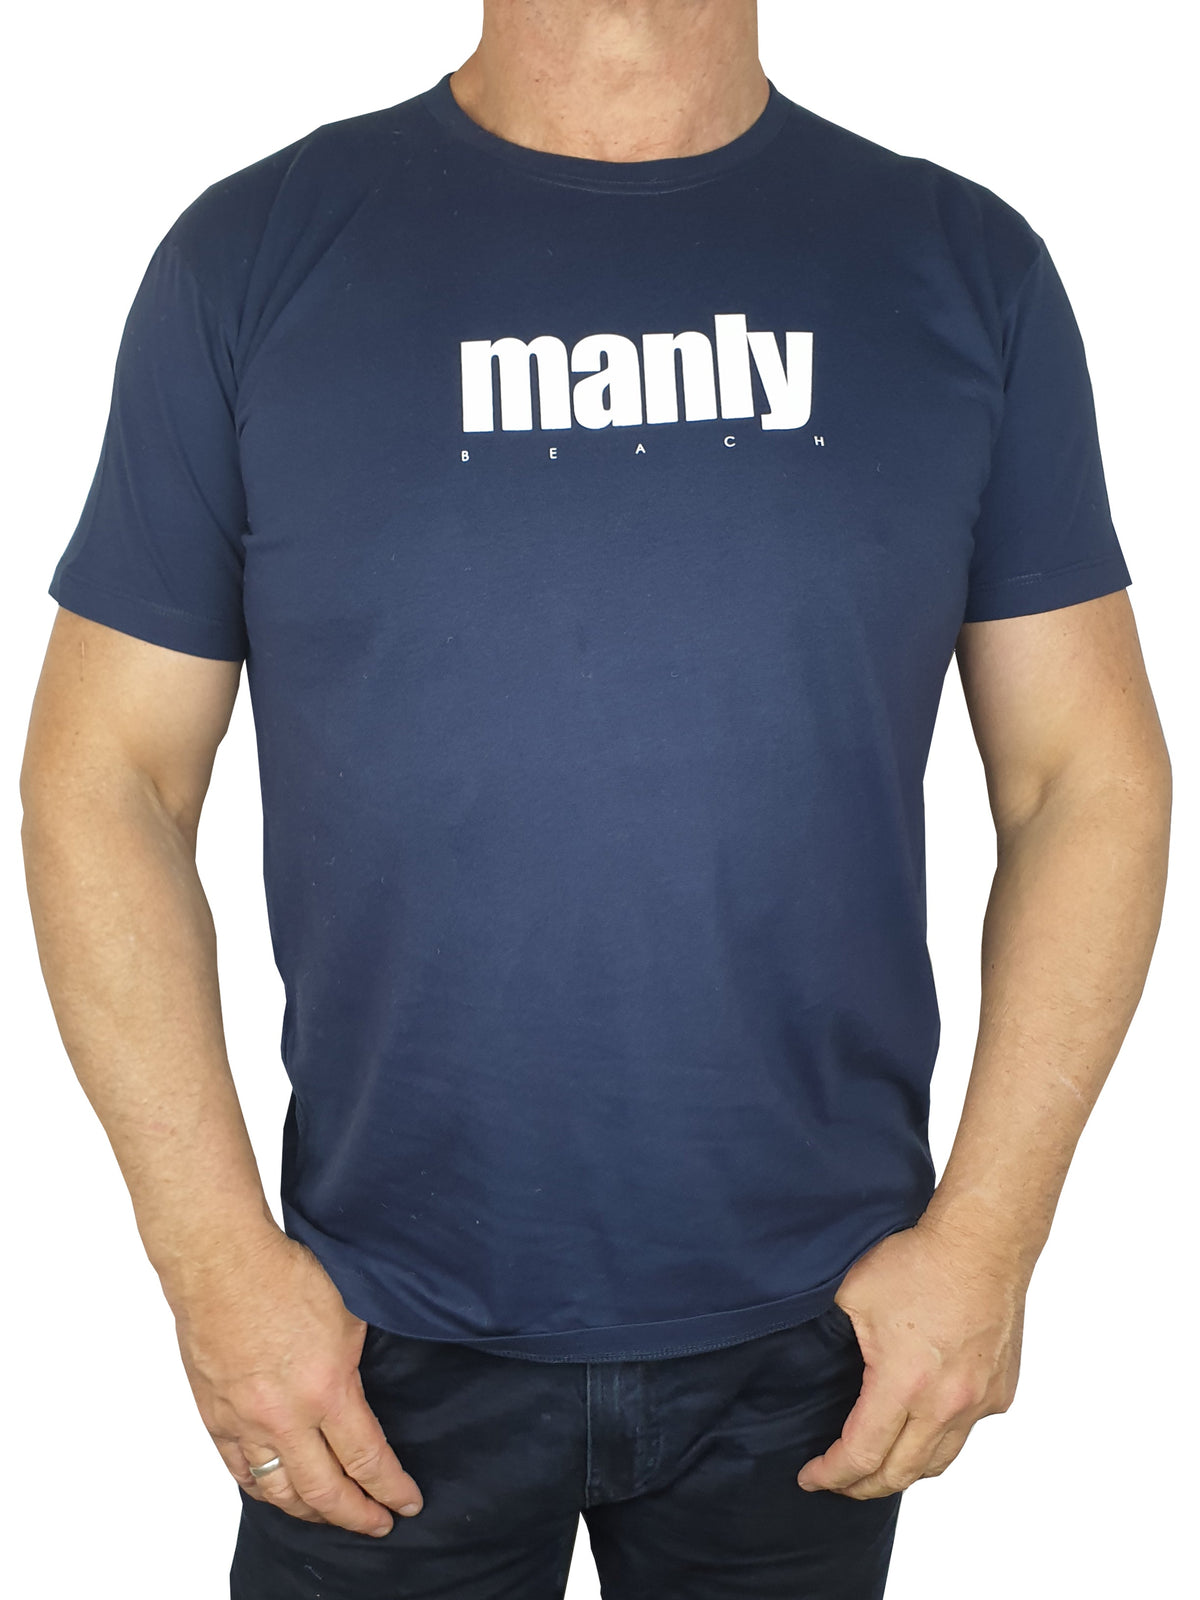 Manly Navy Printed T-Shirt